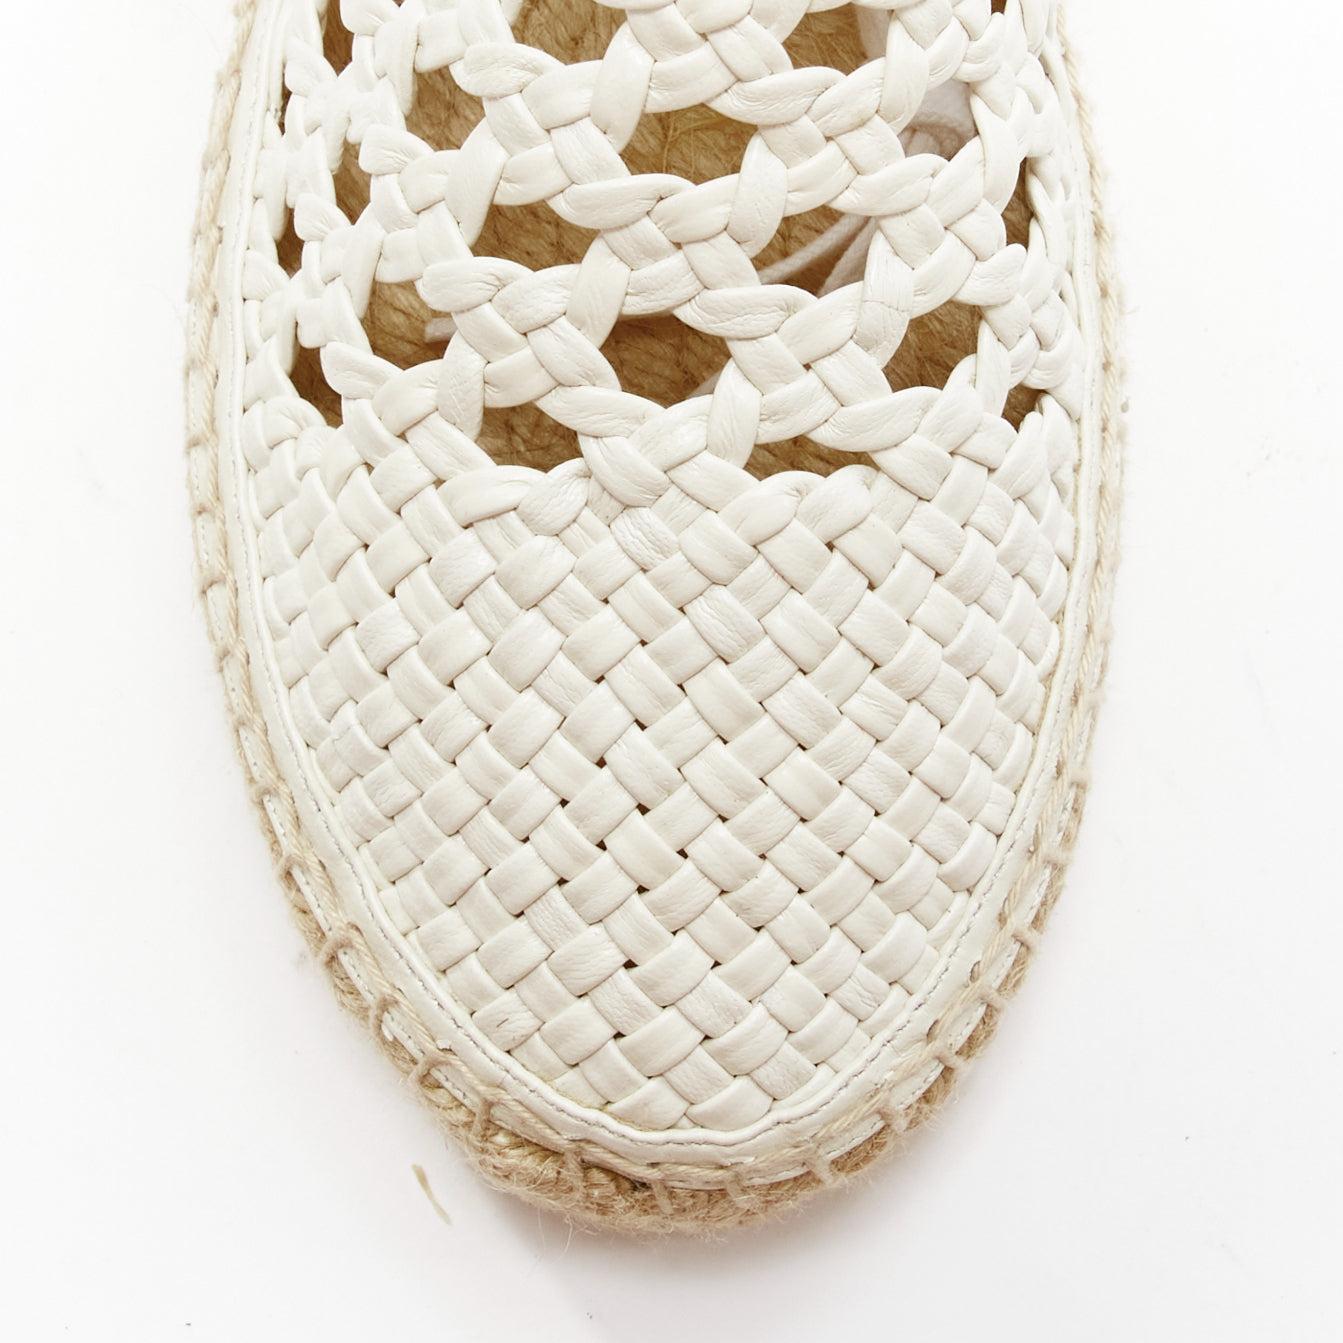 OLD CELINE Phoebe Philo white woven basket leather espadrille ankle boots EU38 1